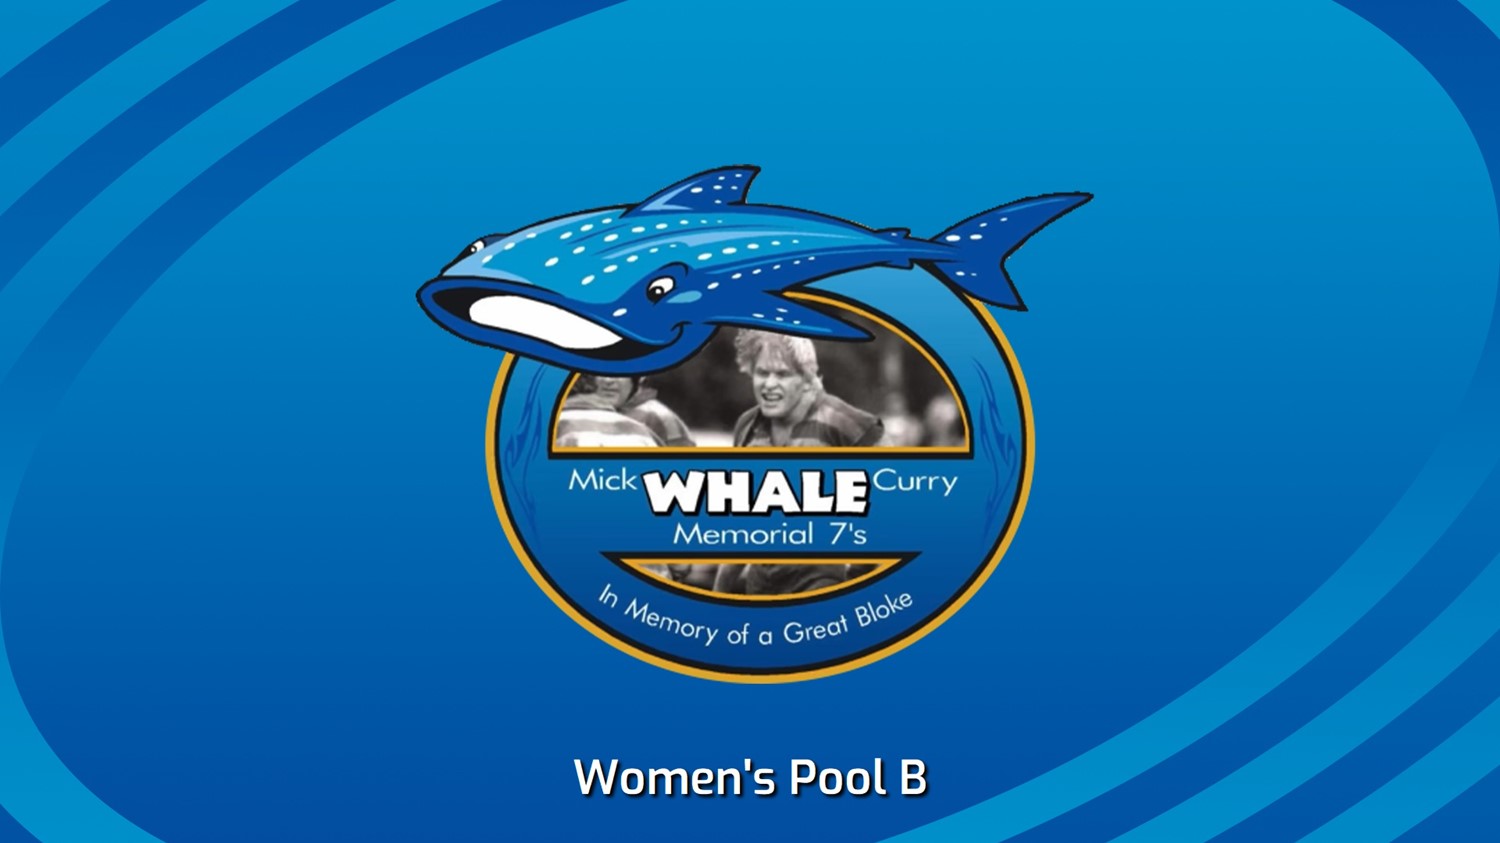 240210-Mick "Whale" Curry Memorial Rugby Sevens Women's Pool B - Gordon v Sydney University Minigame Slate Image